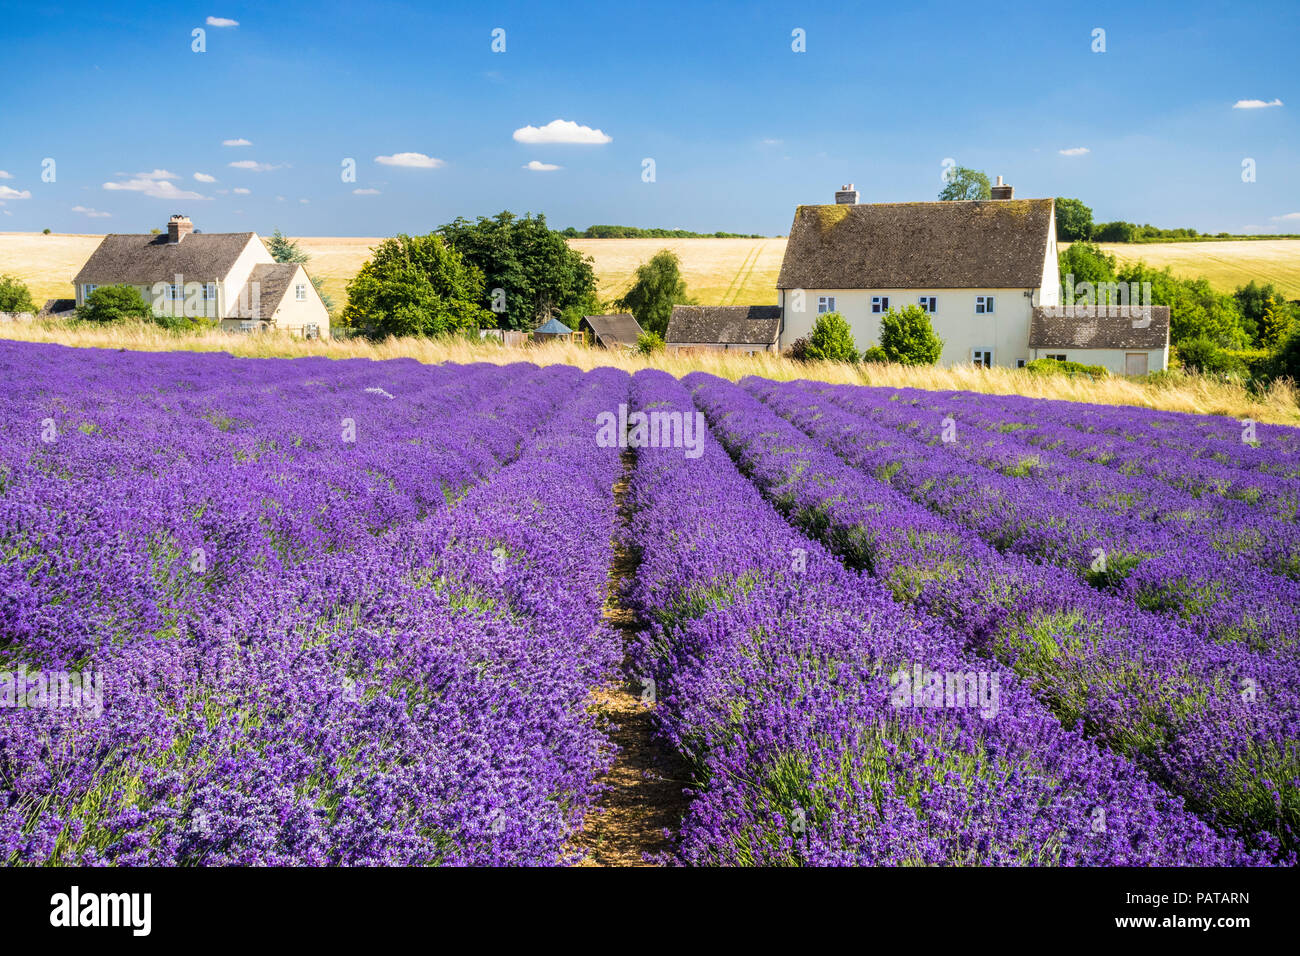 Rows of lavender in an english lavender field at Cotswold lavender Snowshill broadway the Cotswolds Gloucestershire England UK GB Europe Stock Photo